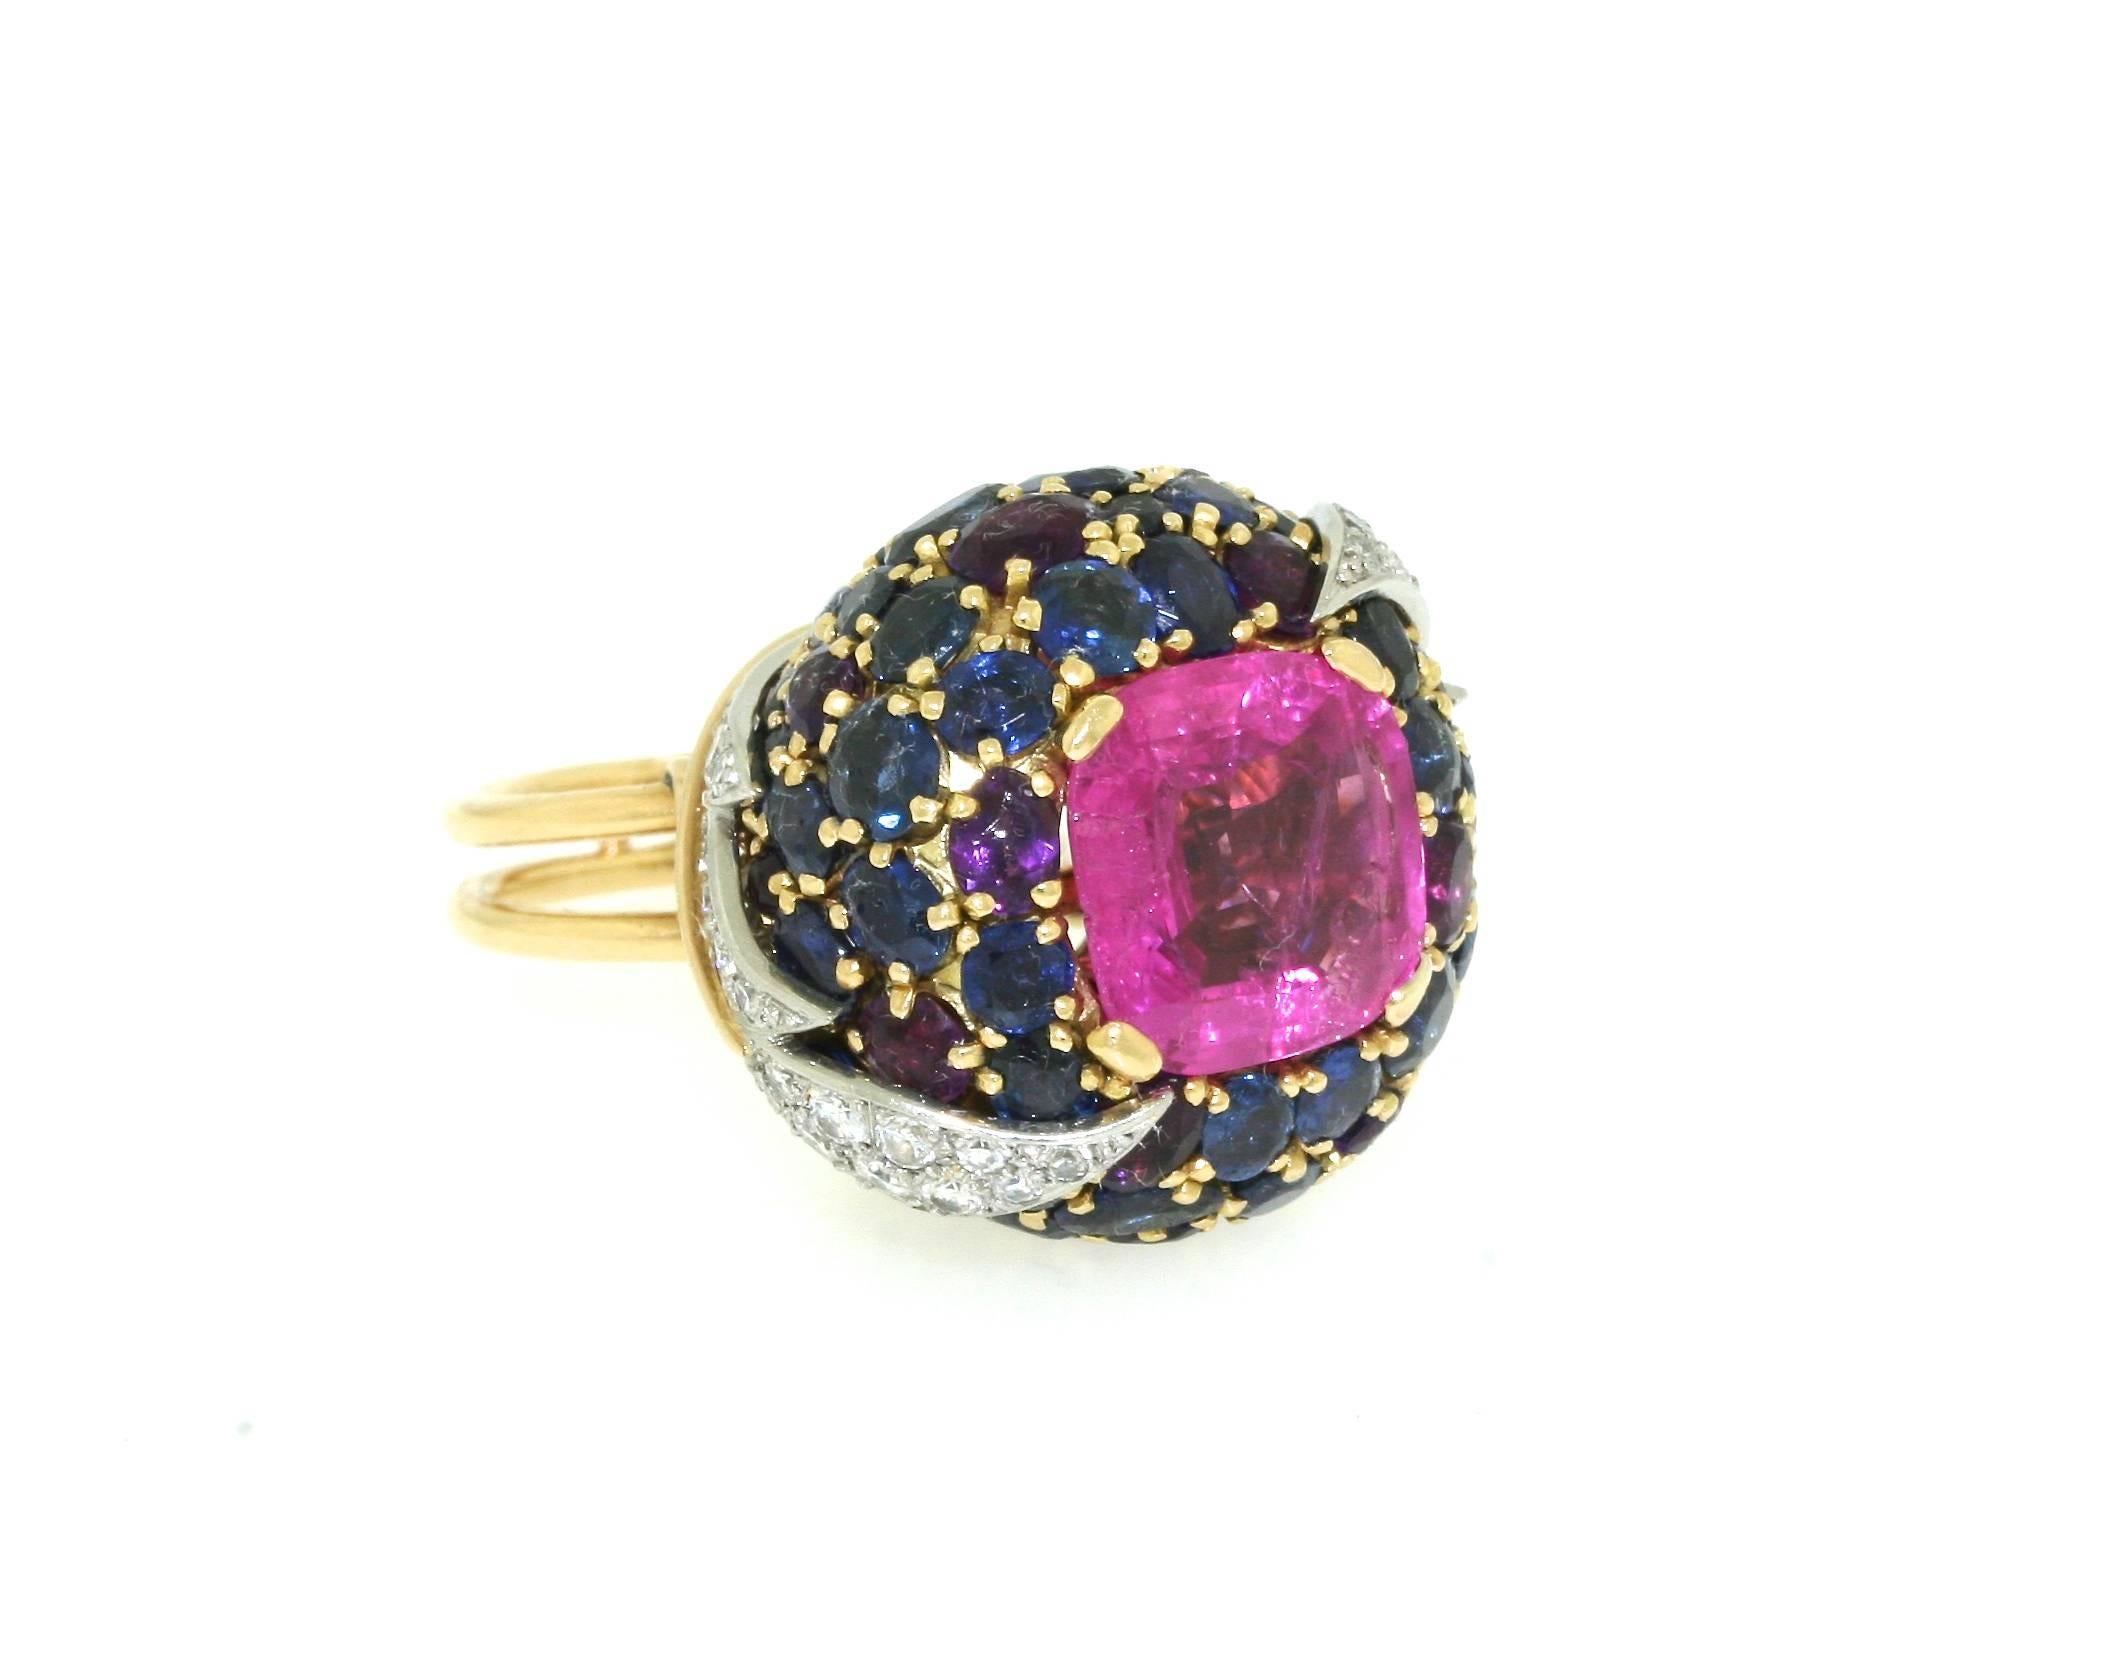 Schlumberger Paris 18k gold platinum and diamond foliate motif ring with a bombe cluster of sapphires and amethysts centering a certified natural 6.91 cushion-cut pink sapphire. Ring measures 1